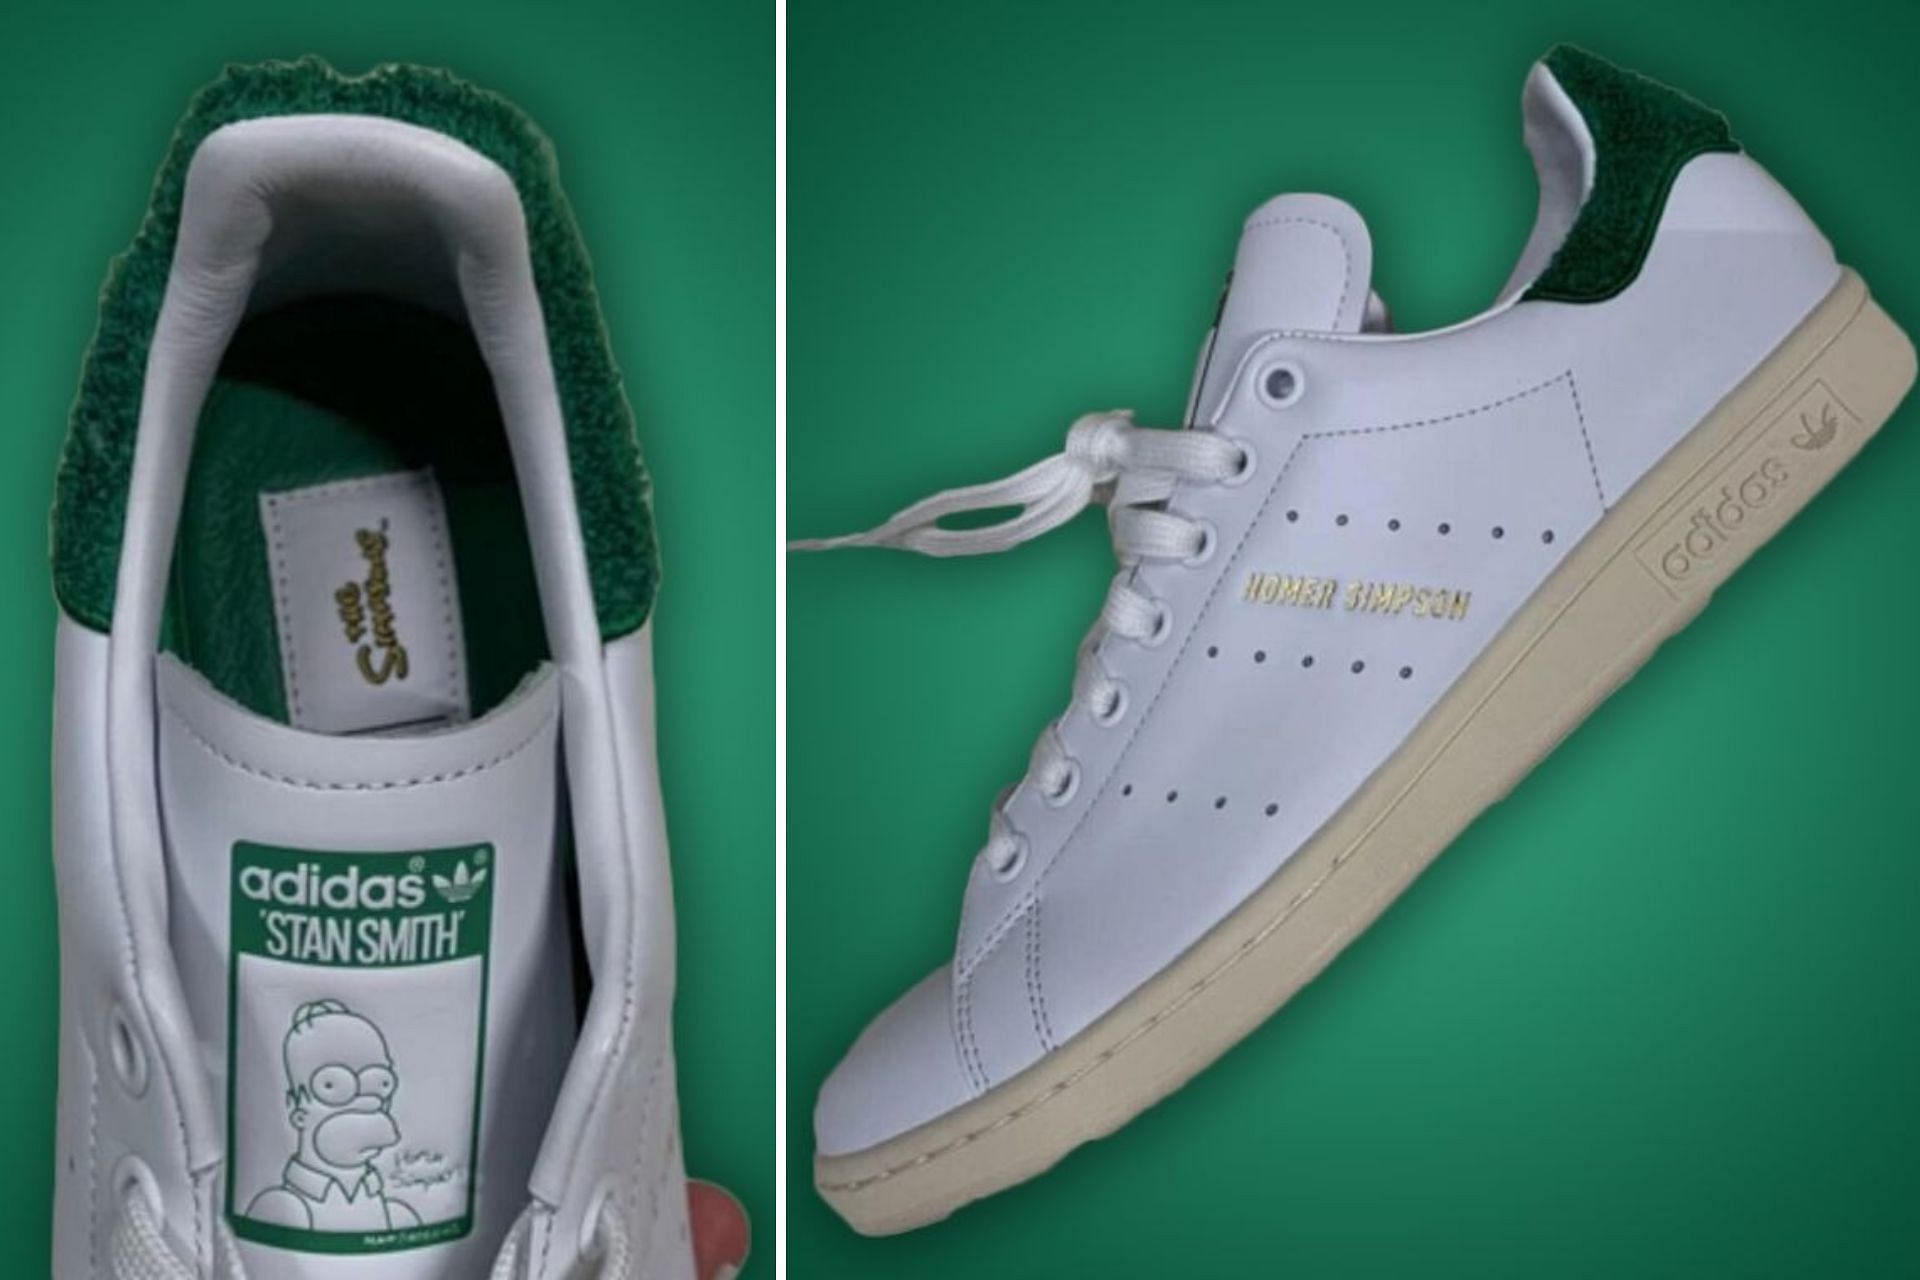 Where to The x Adidas Stan Smith “Homer Into Bushes” shoes? Everything we know far